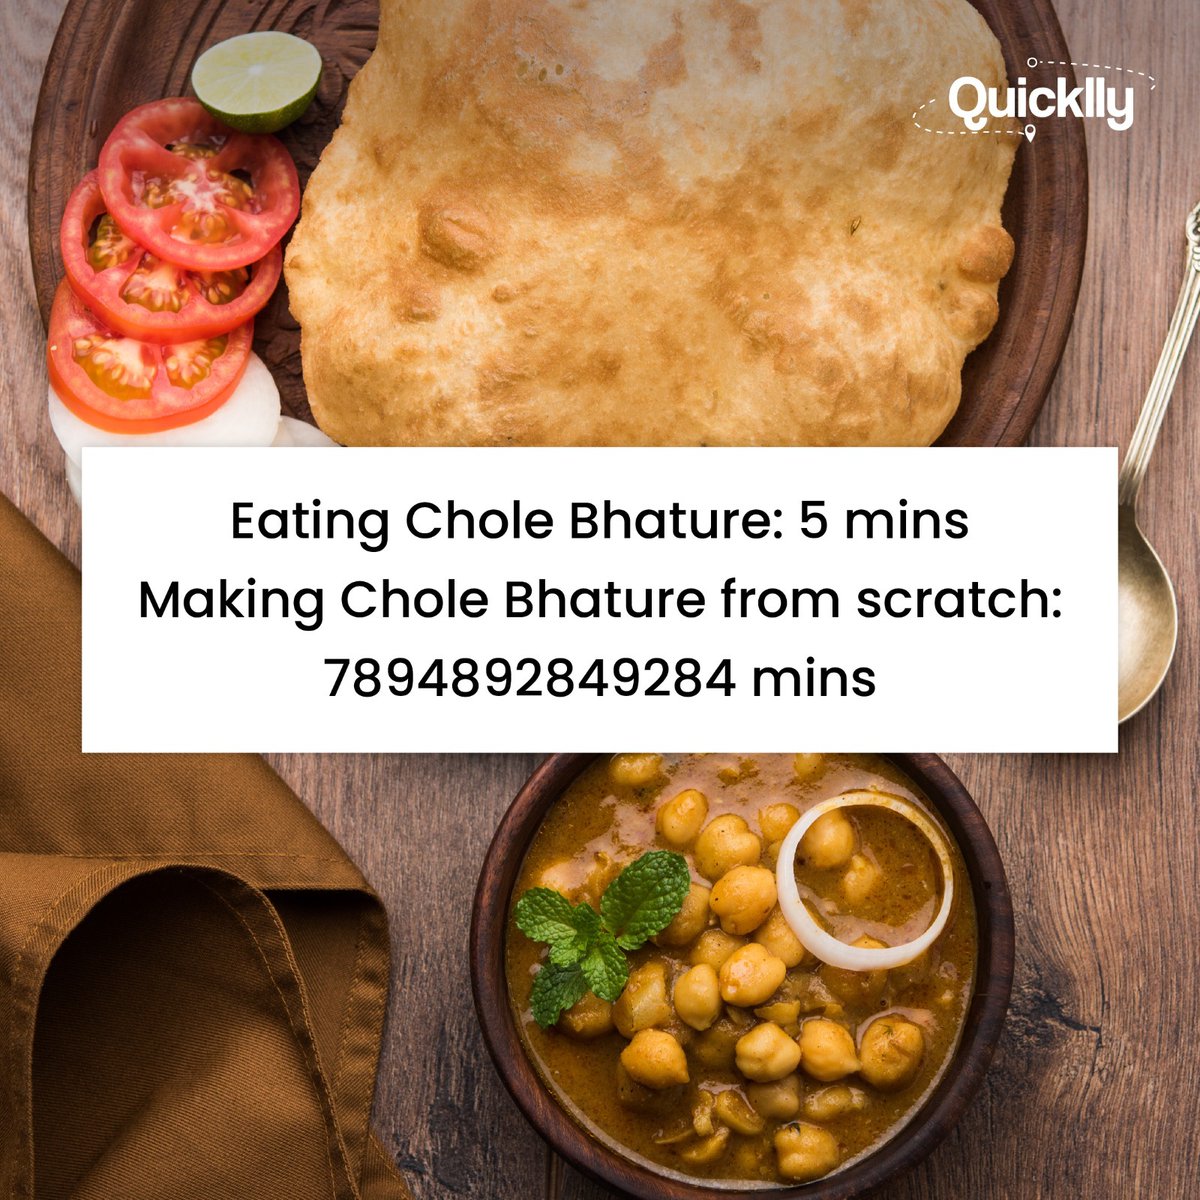 Spice up your day with the mouthwatering charm of slow-cooked perfection!

#Quicklly #Quicklly_Official #QuickllyIT #IndianFoods #IndianMeals #Chole #Bhature #CholeBhature #CookingTime #Salad #IndianCuisine #Food #HomeMade #NorthIndian #CholeKulche #FoodiesOfInstagram #Foodgram